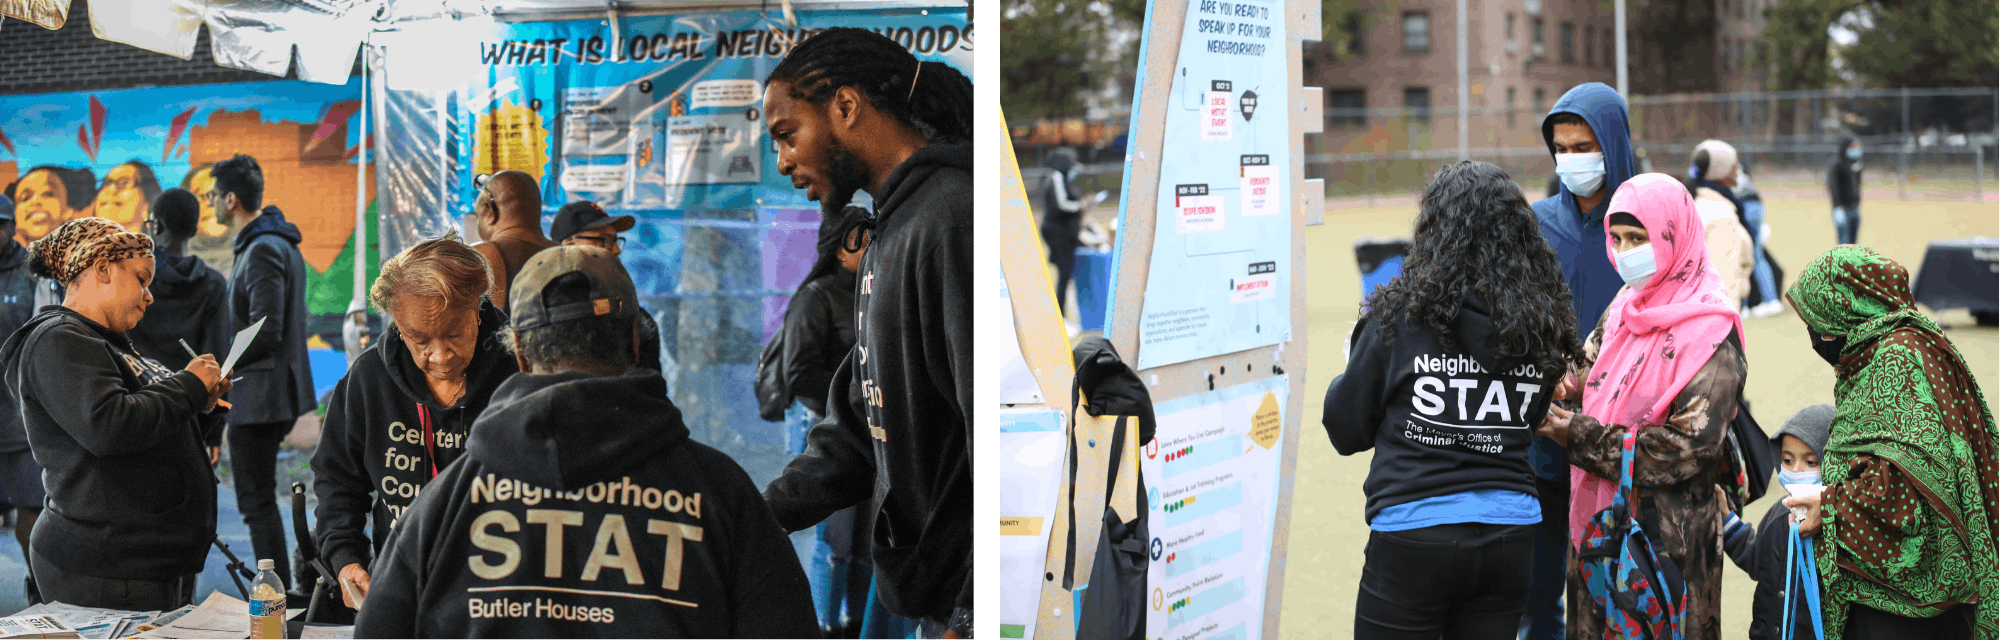 Local NeighborhoodStat participatory budgeting events, Butler Houses in 2019 and Bushwick Houses in 2021. Photos by Emmanuel Oni and Bill Harkins, Center for Court Innovation.